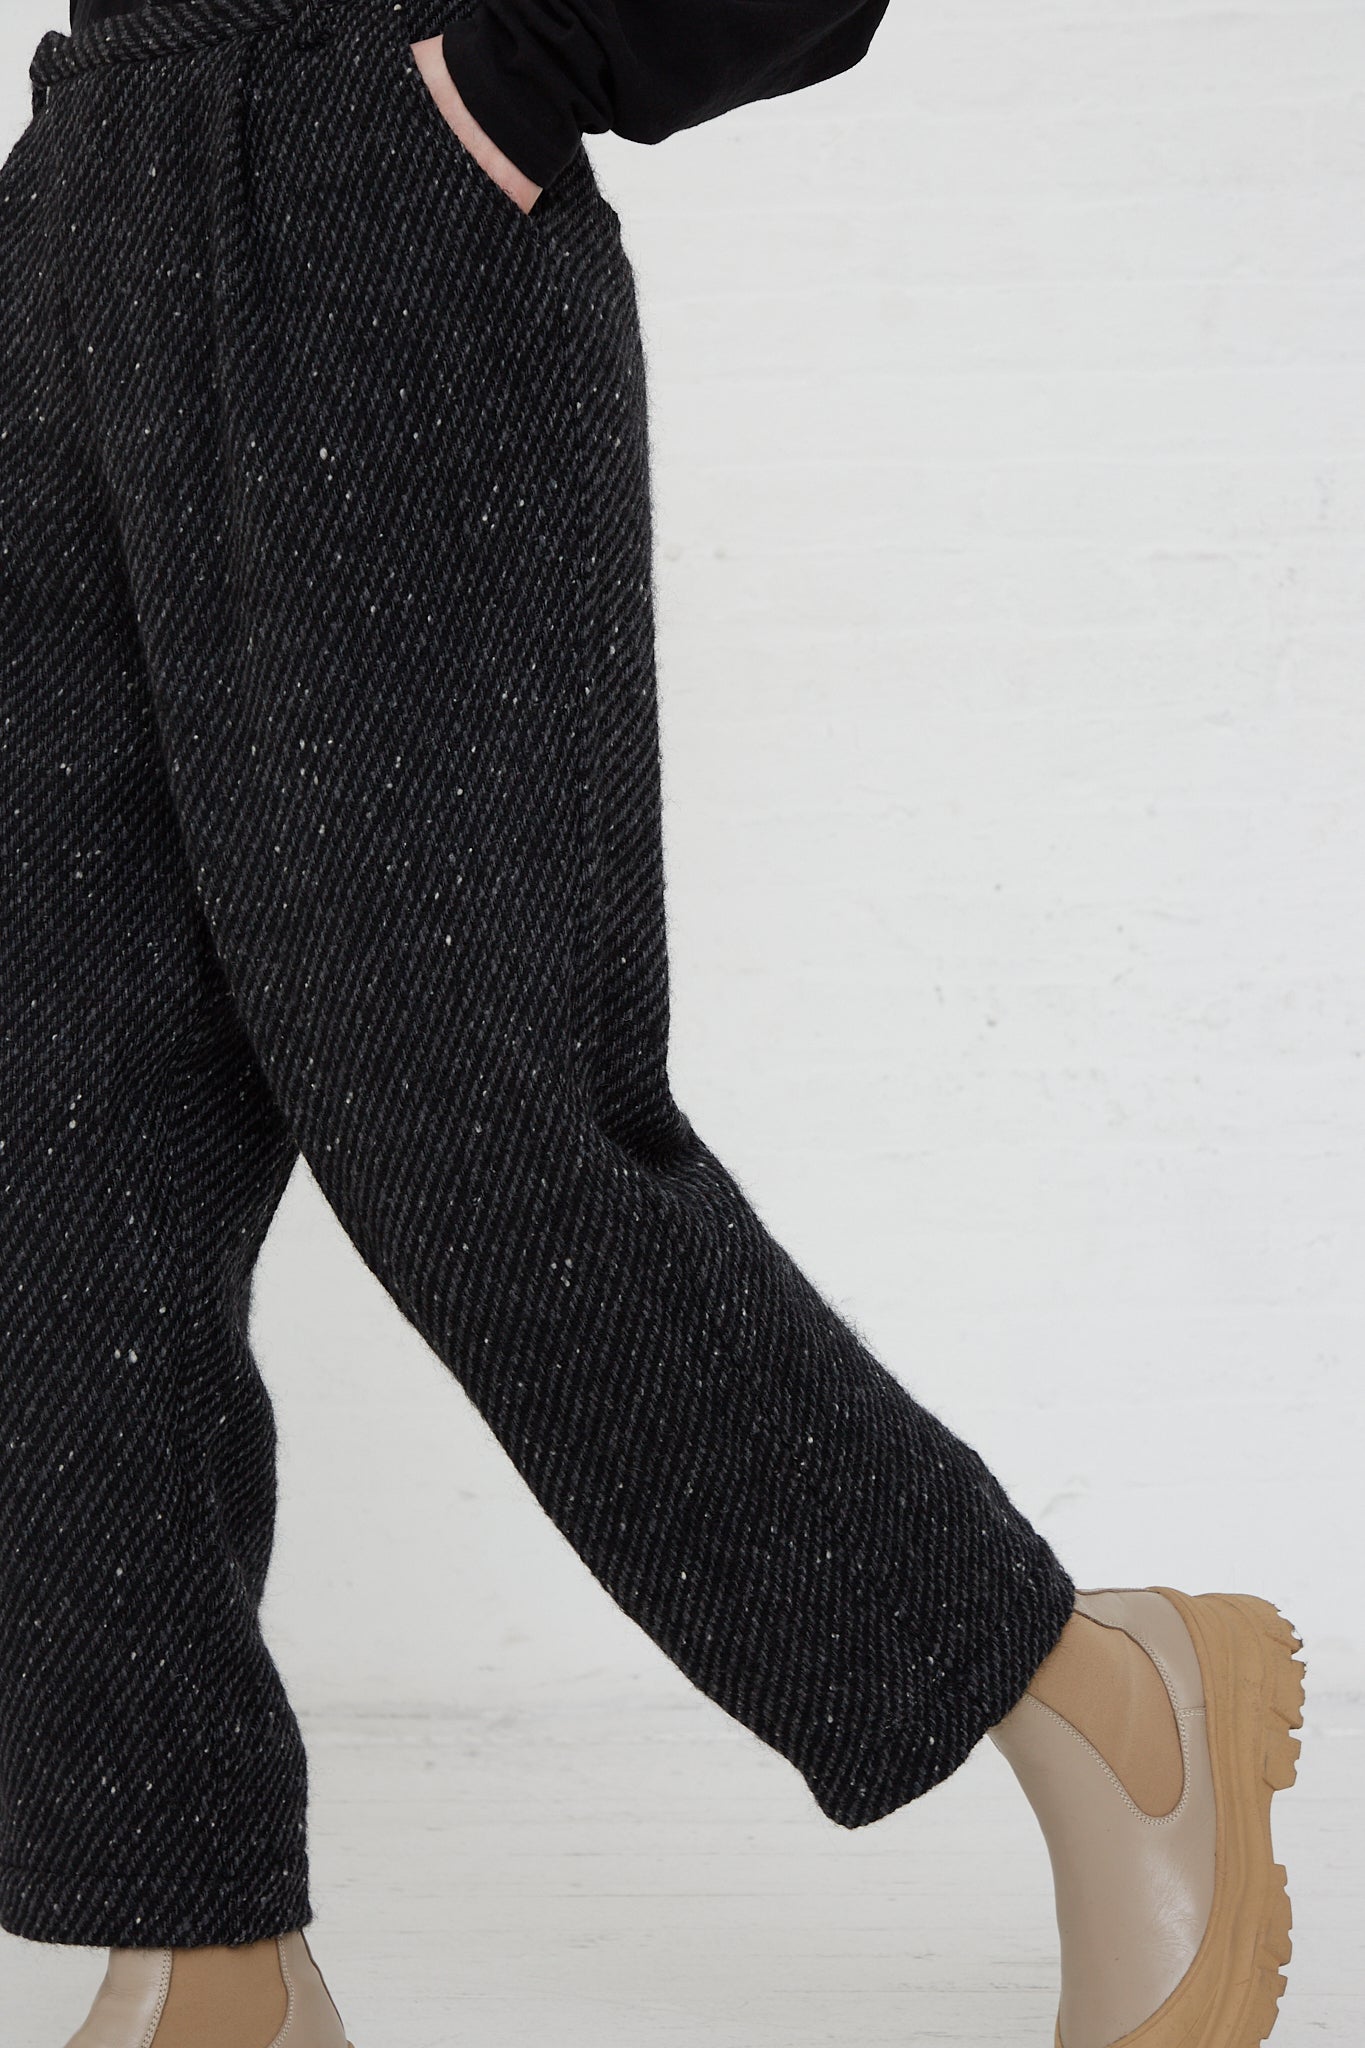 A woman donning a pair of Ichi Antiquités' Snow Nep Wool Pant in Black, with a relaxed fit, paired with brown boots.